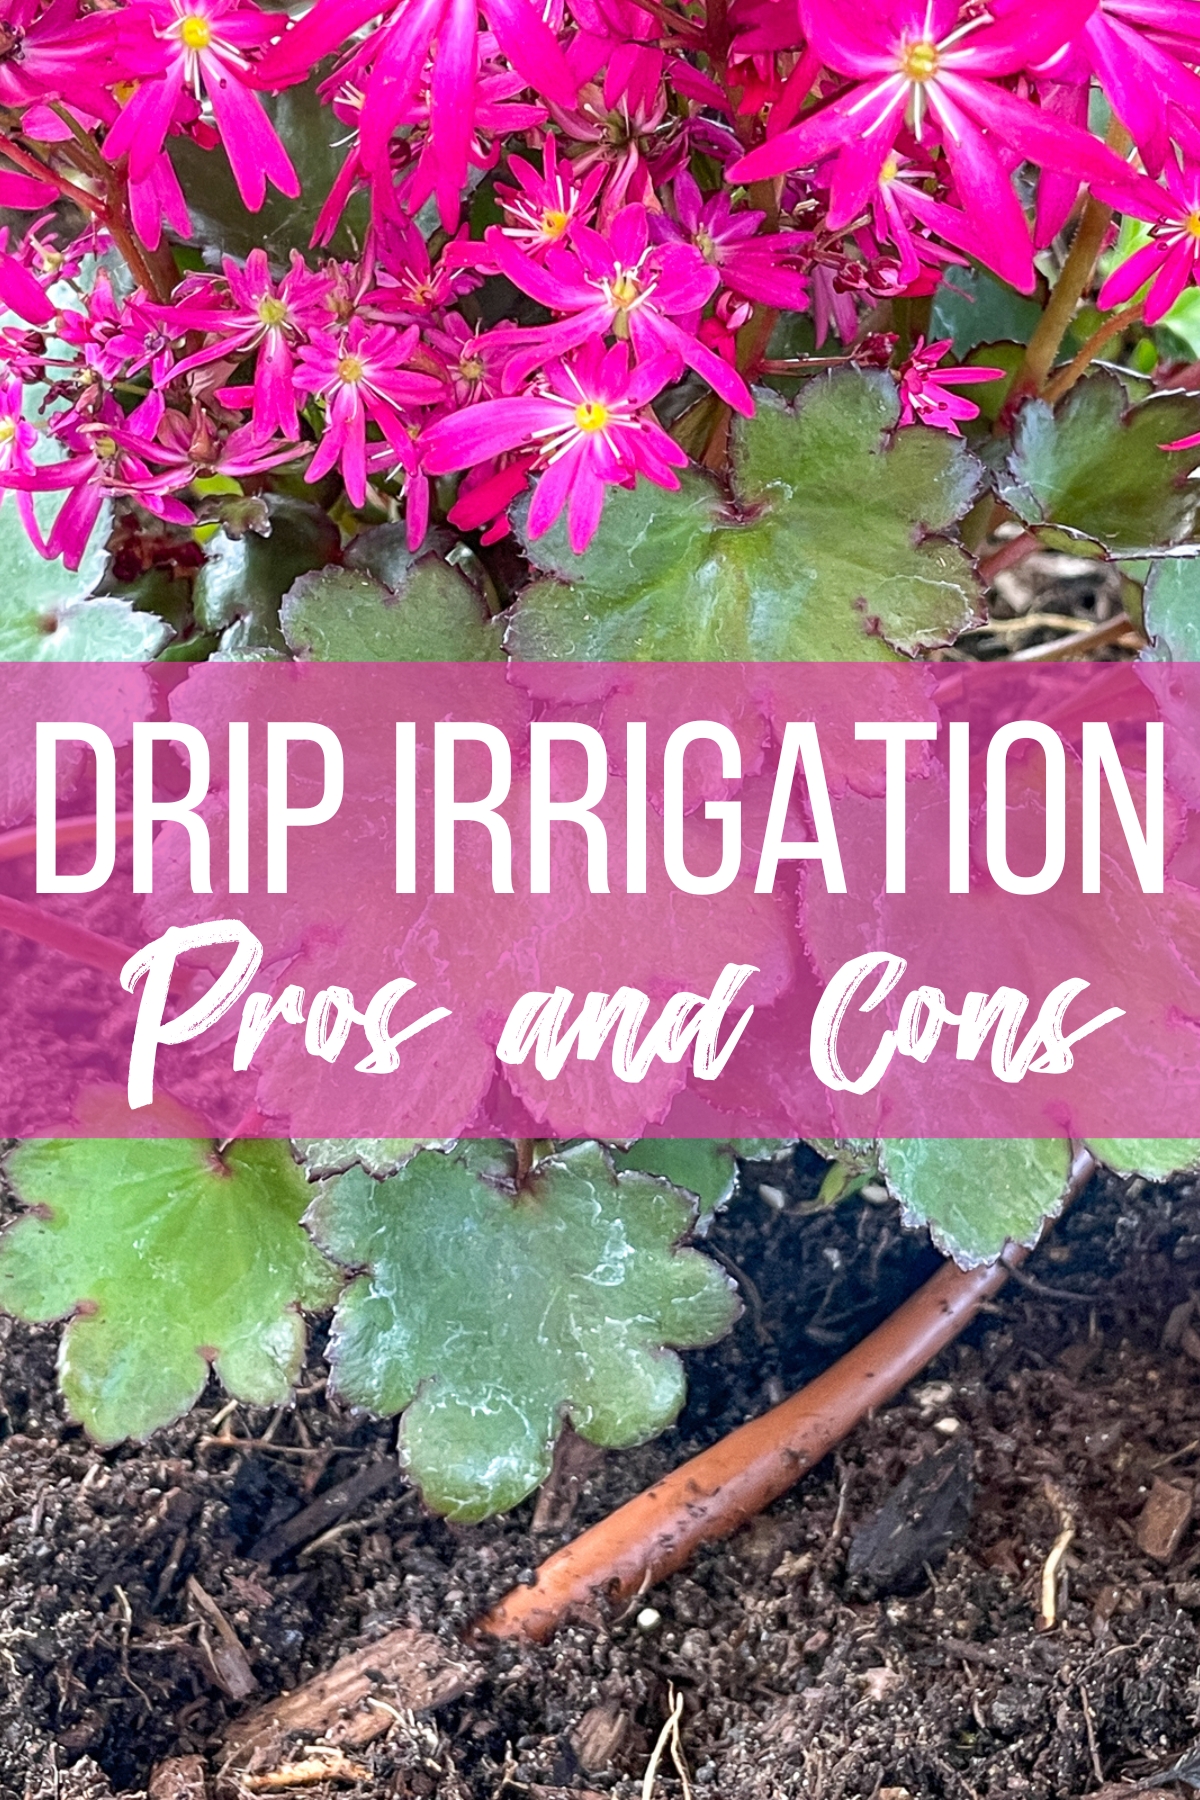 Drip irrigation pros and cons